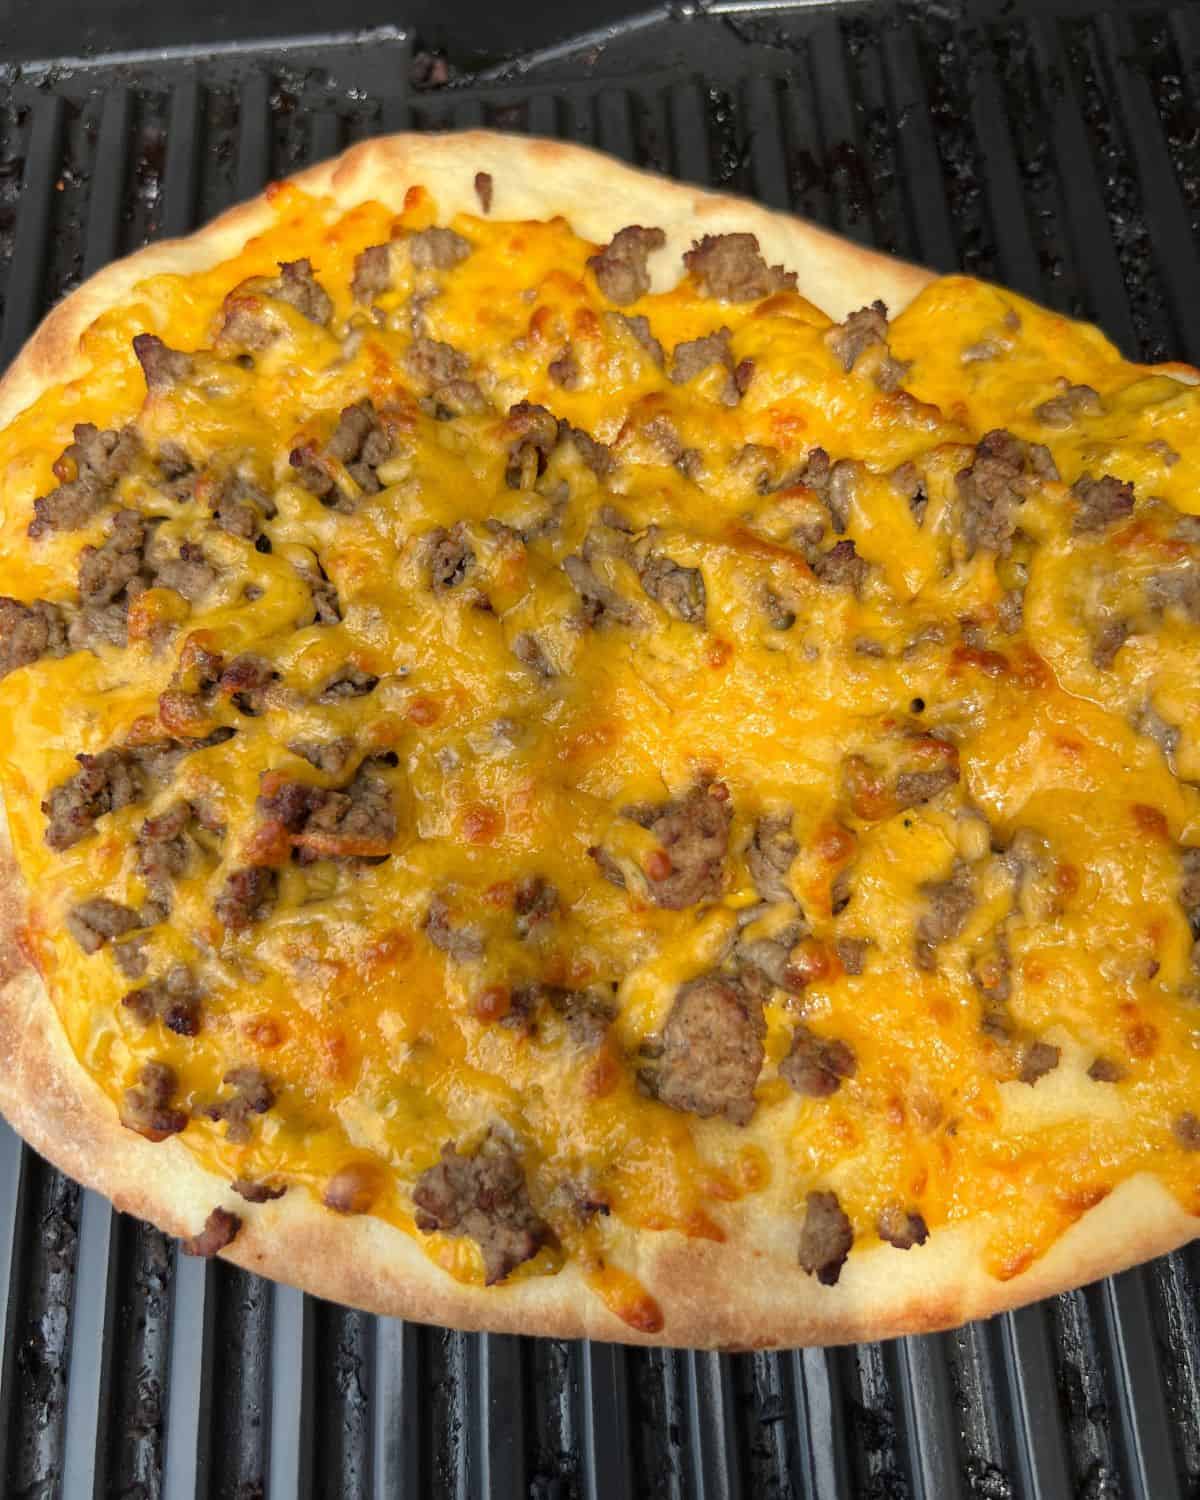 Naan bread topped with nacho cheese sauce and ground beef on a grill.  